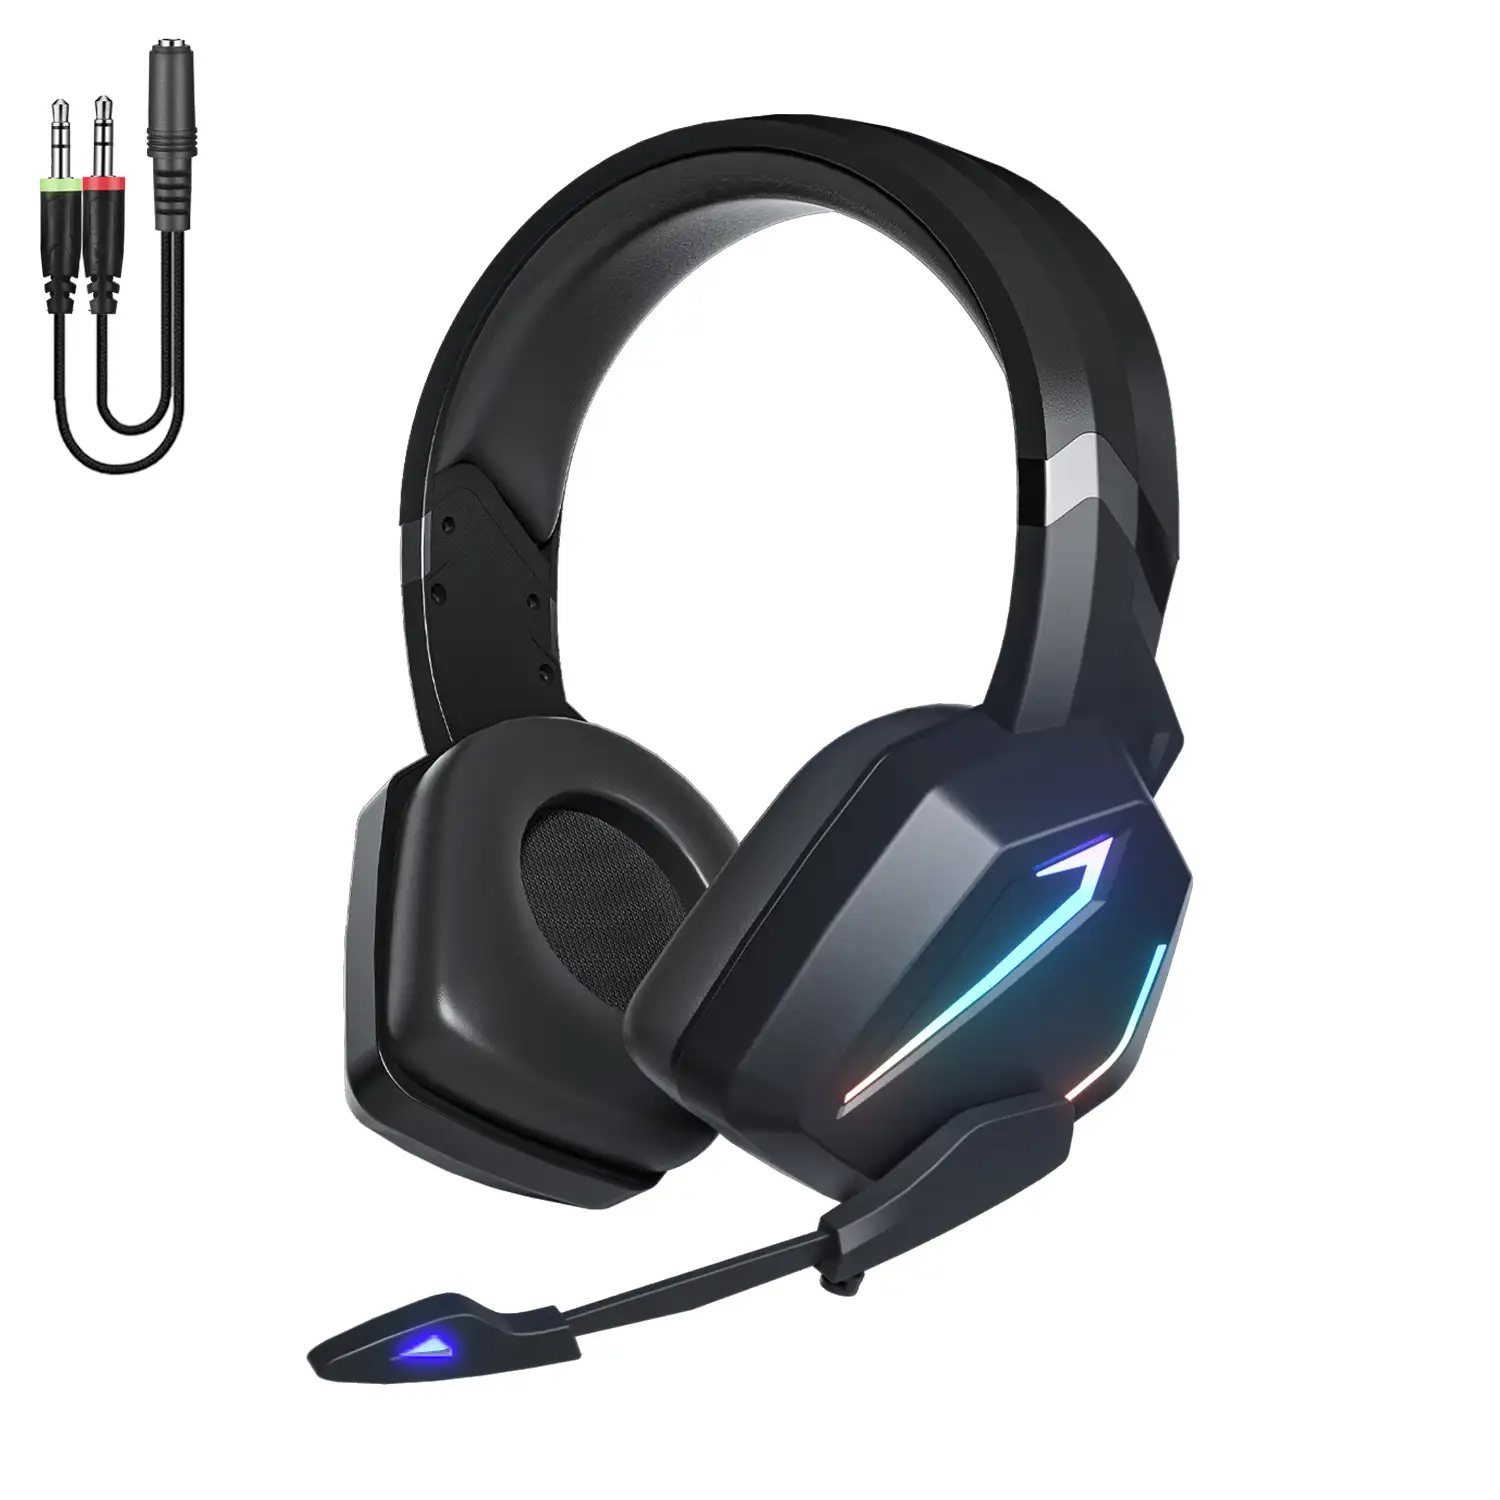 Headset SY820MV con luces led. Auriculares gaming con micro